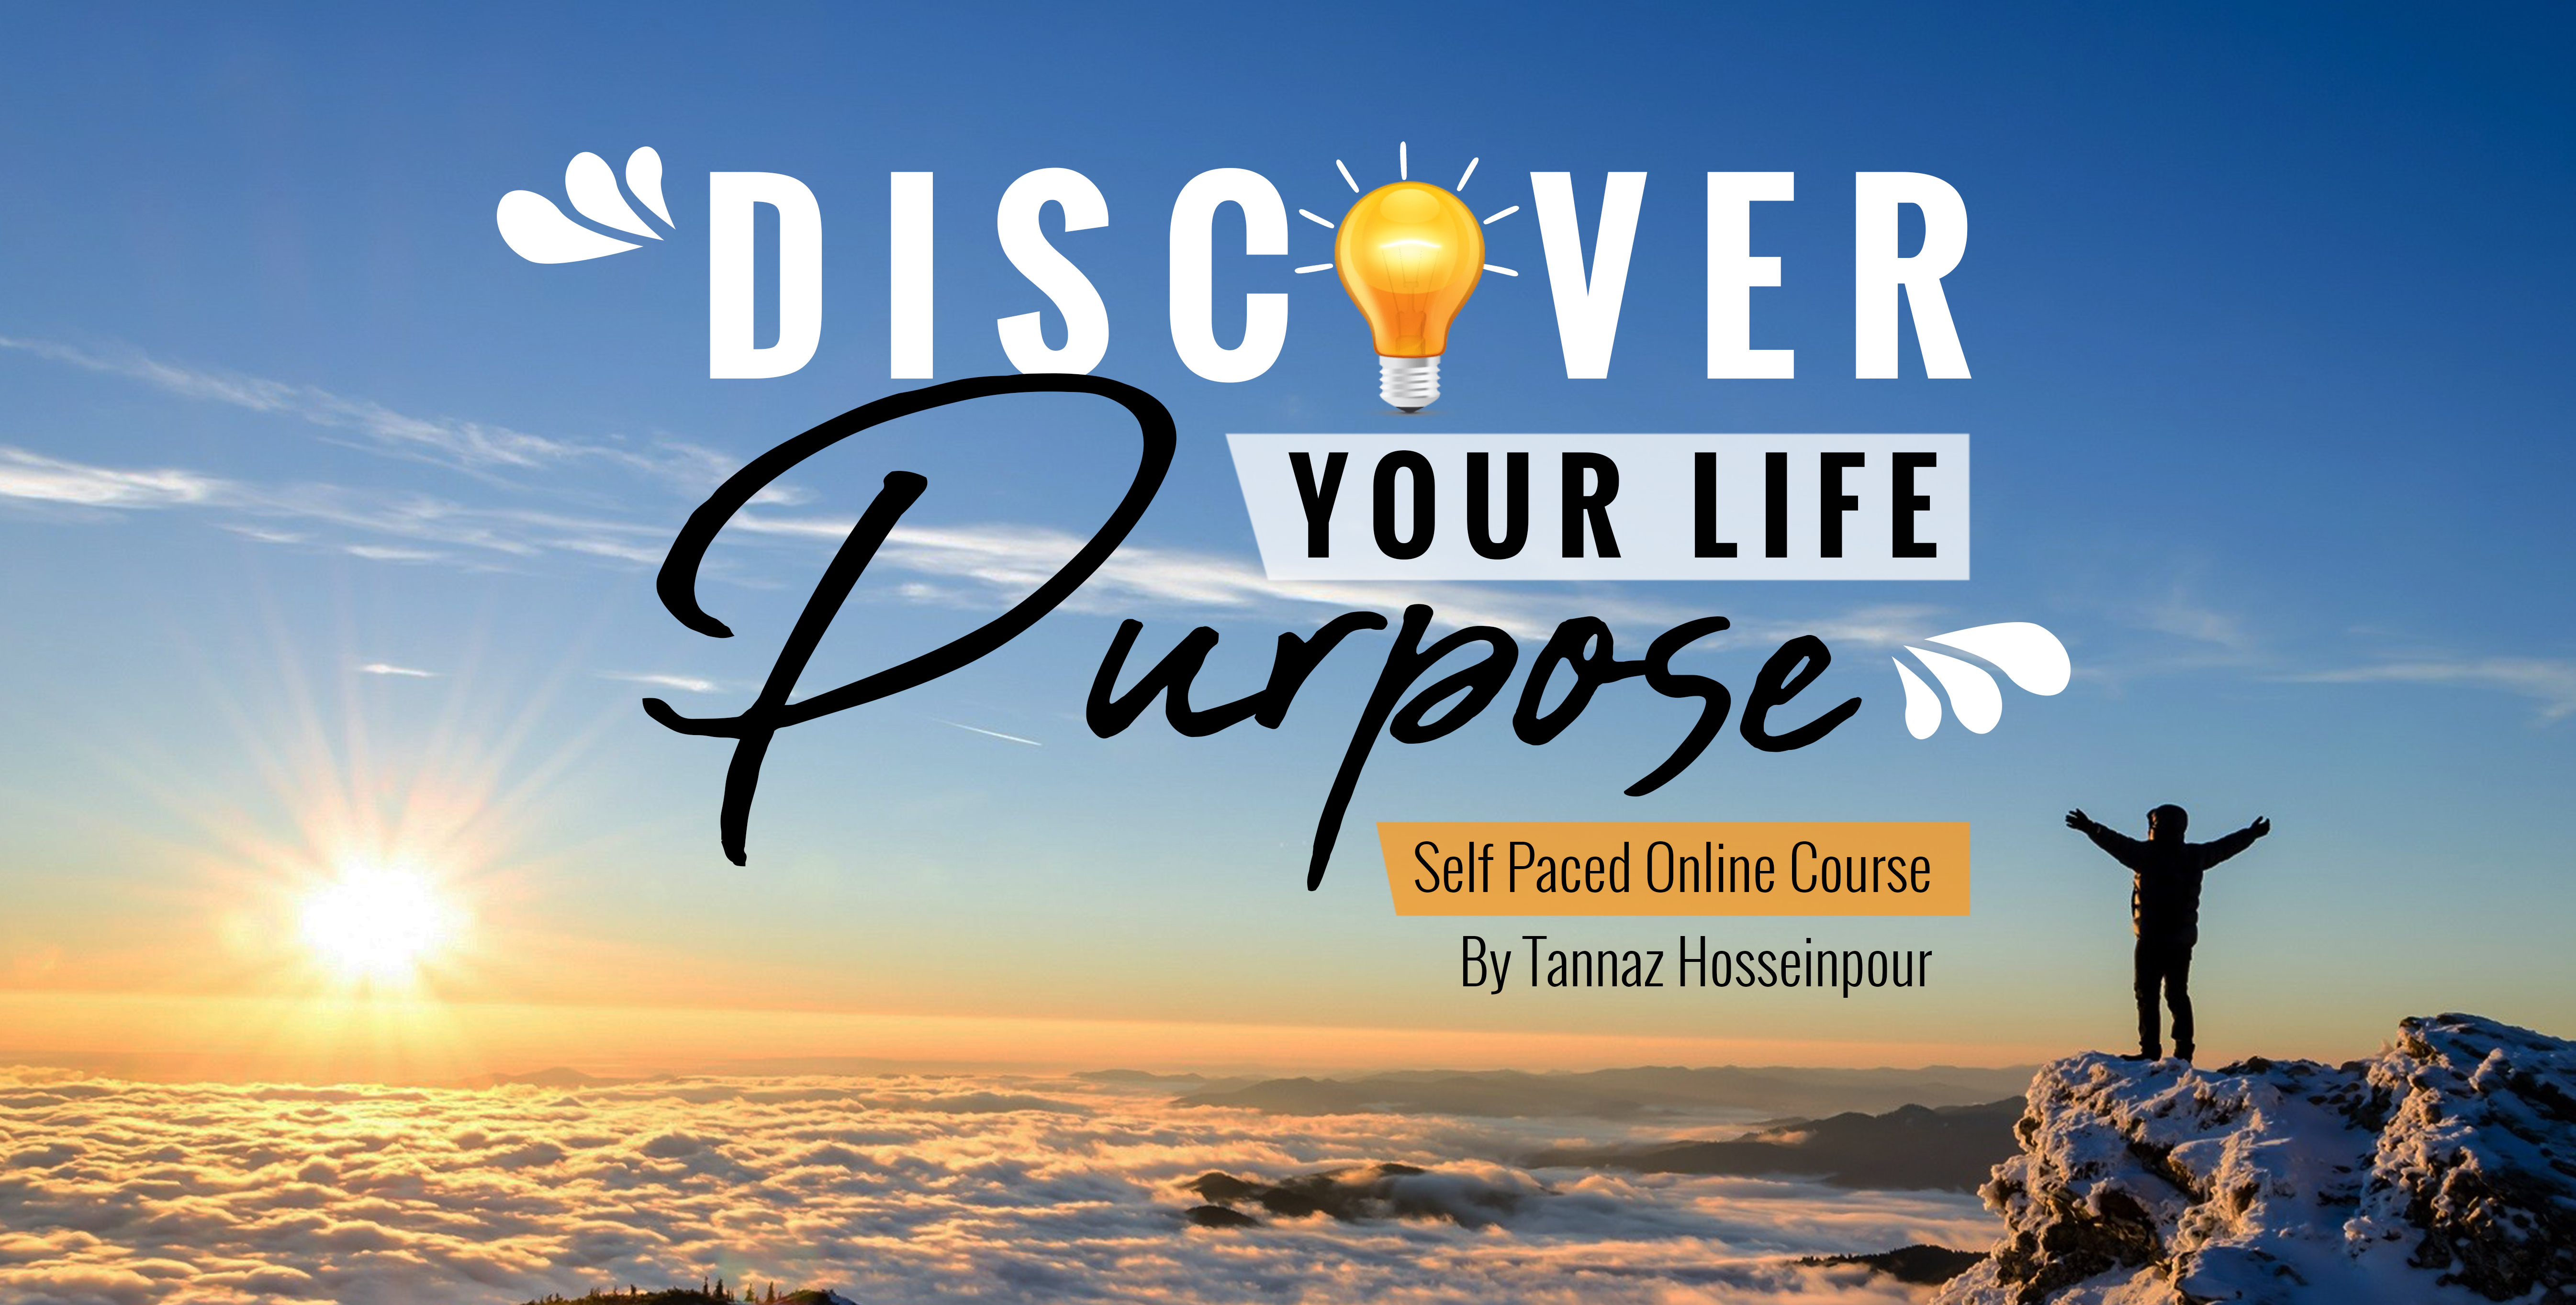 Discover Your Life Purpose with Tannaz Hosseinpour